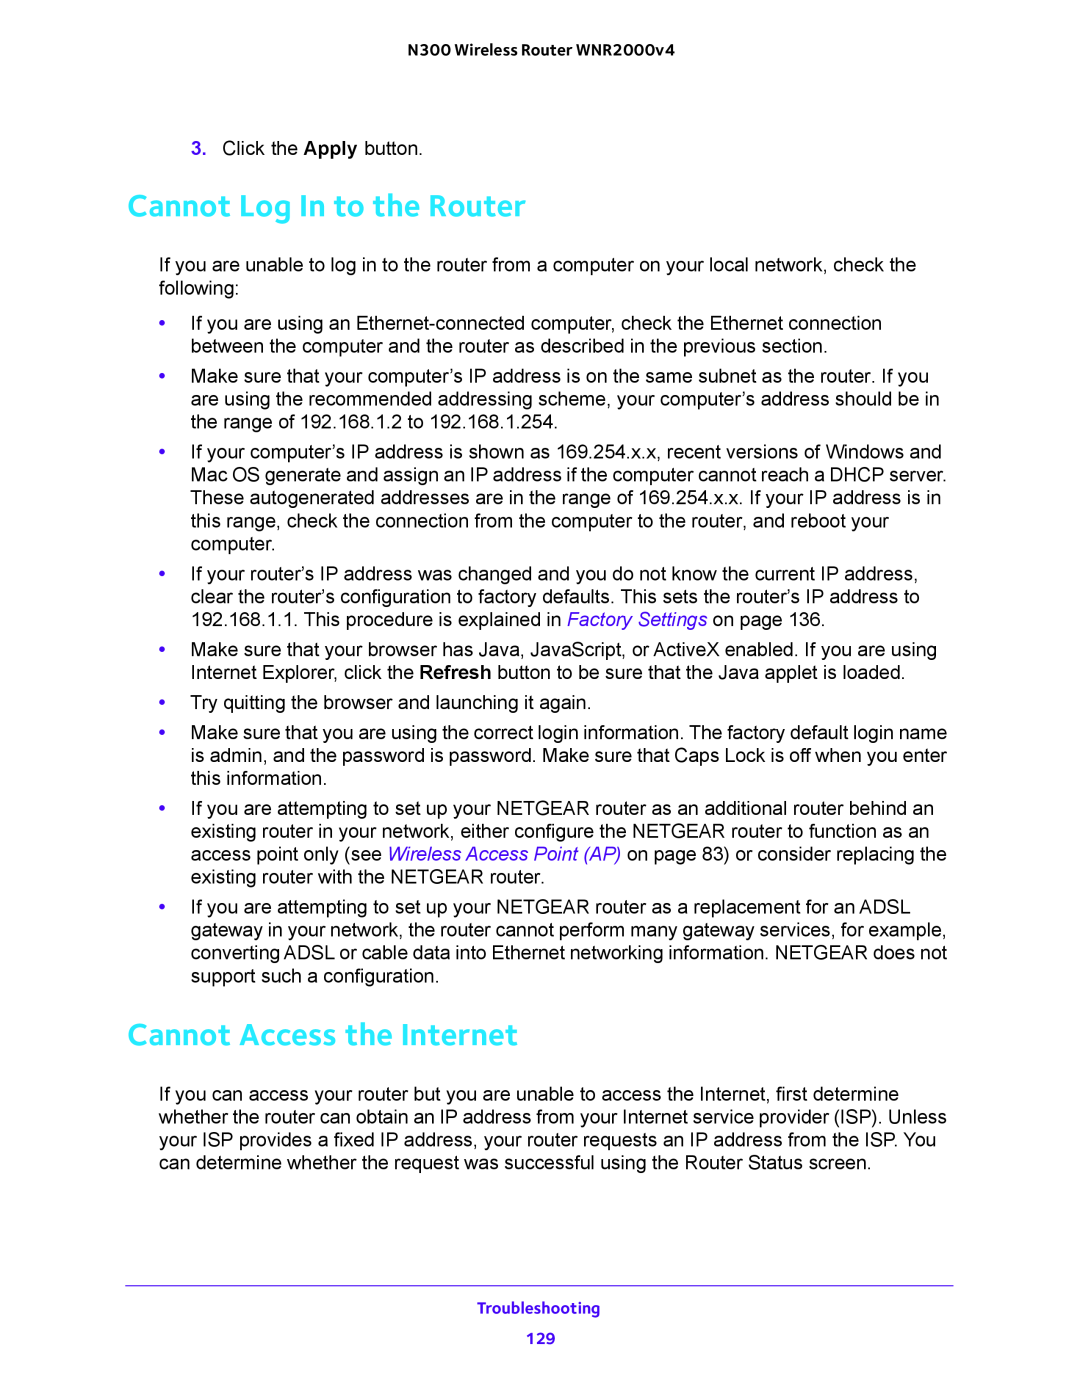 NETGEAR WNR200v4 user manual Cannot Log In to the Router, Cannot Access the Internet 